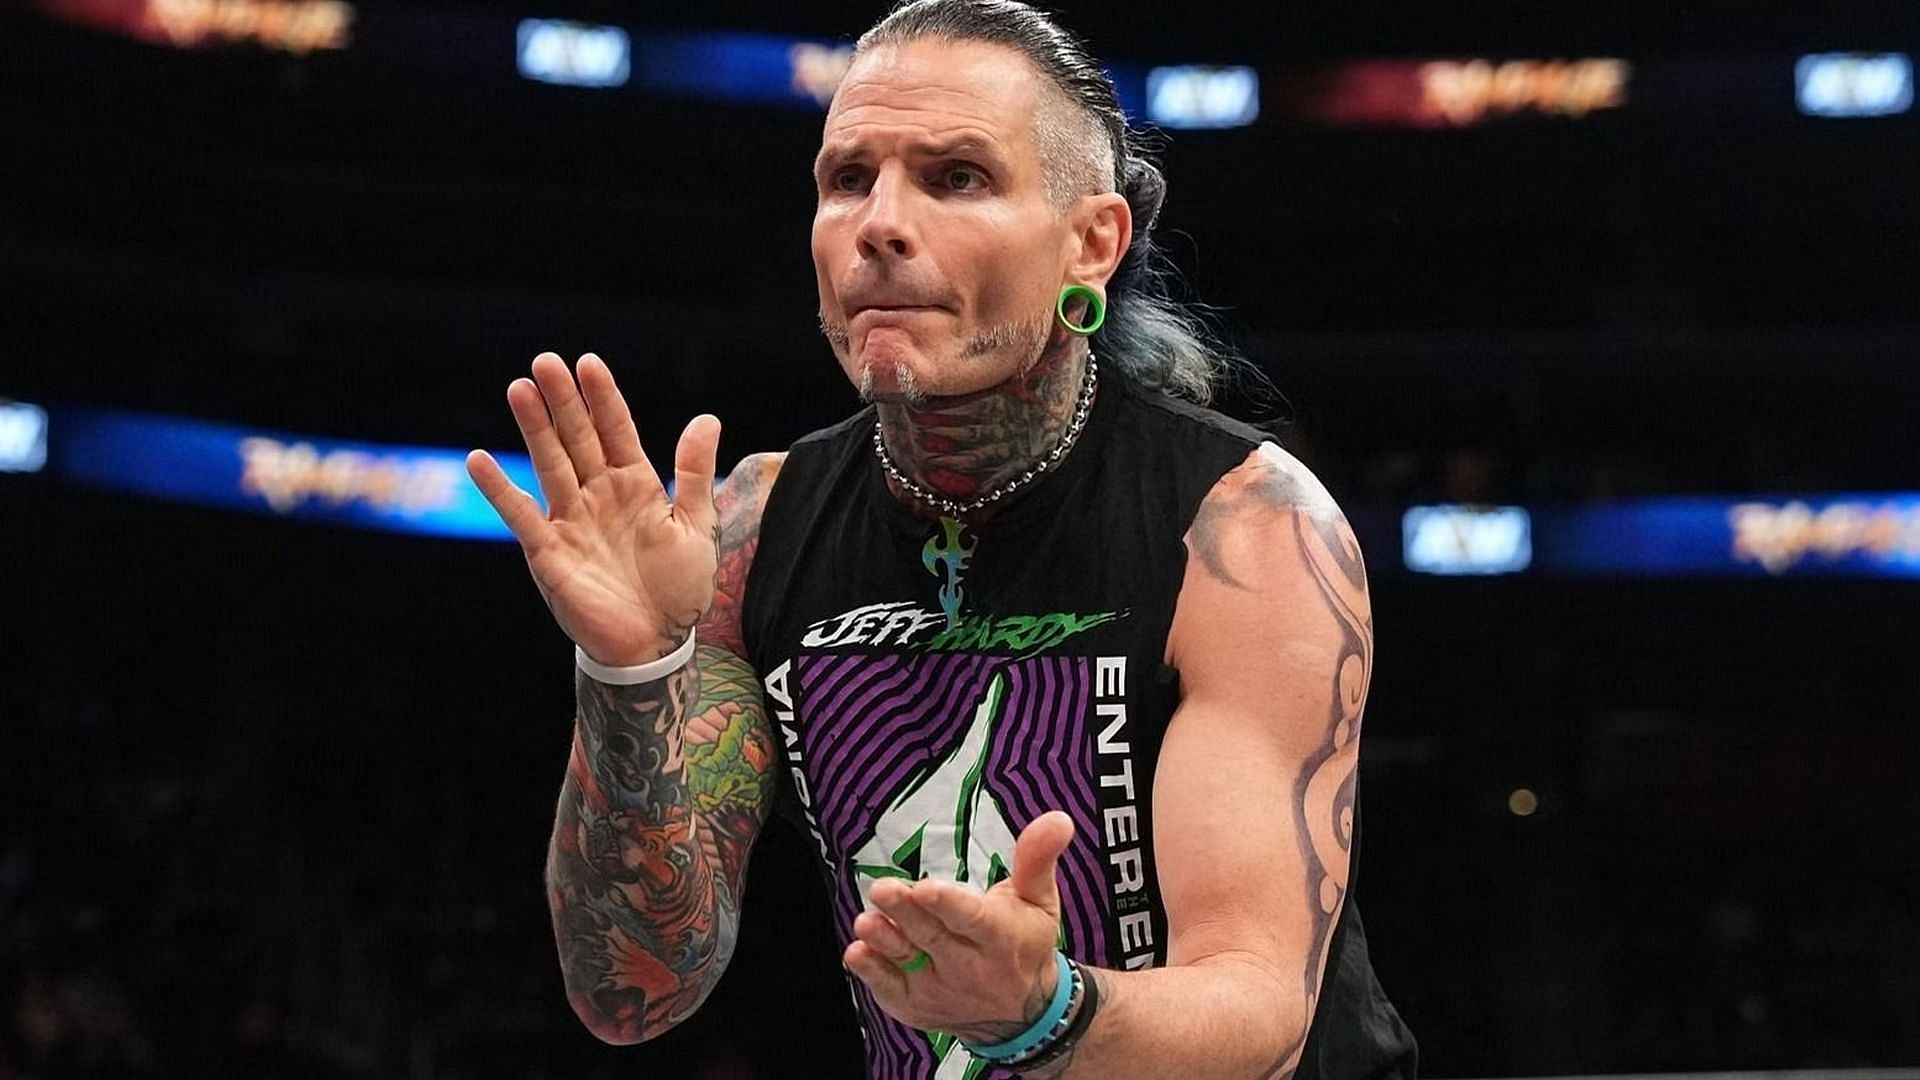 Jeff Hardy currently performs on AEW Rampage